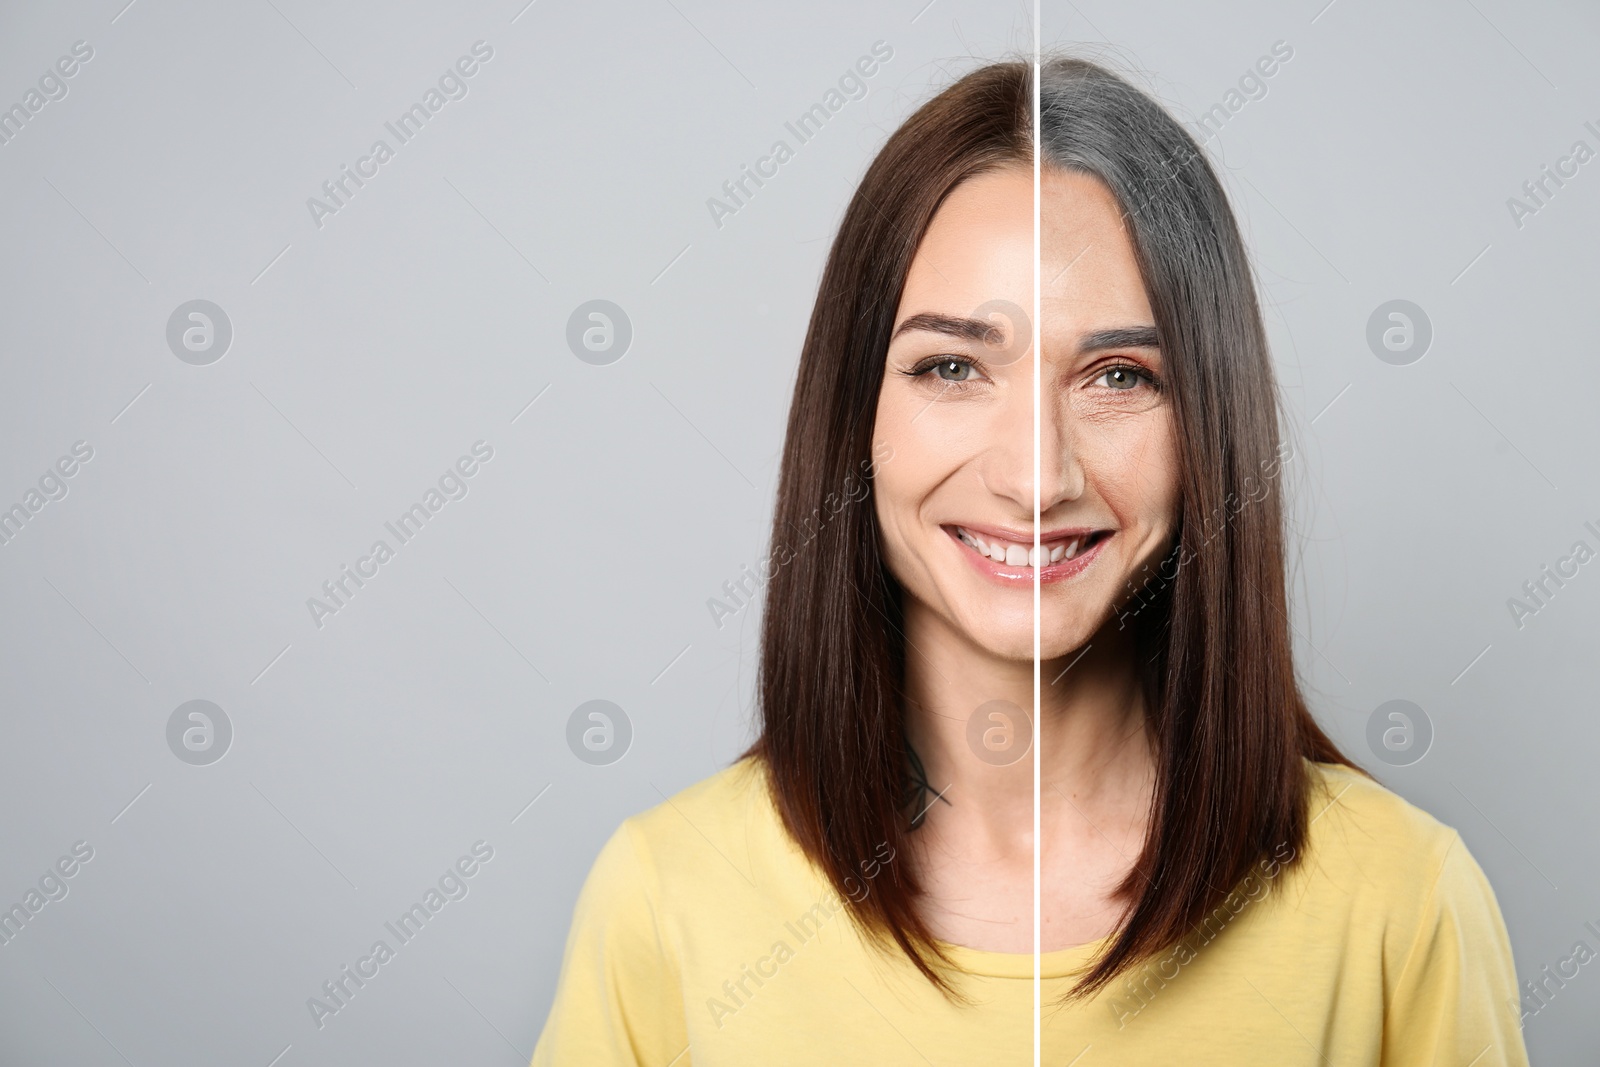 Image of Changes in appearance during aging. Portrait of woman divided in half to show her in younger and older ages. Collage design on light grey background